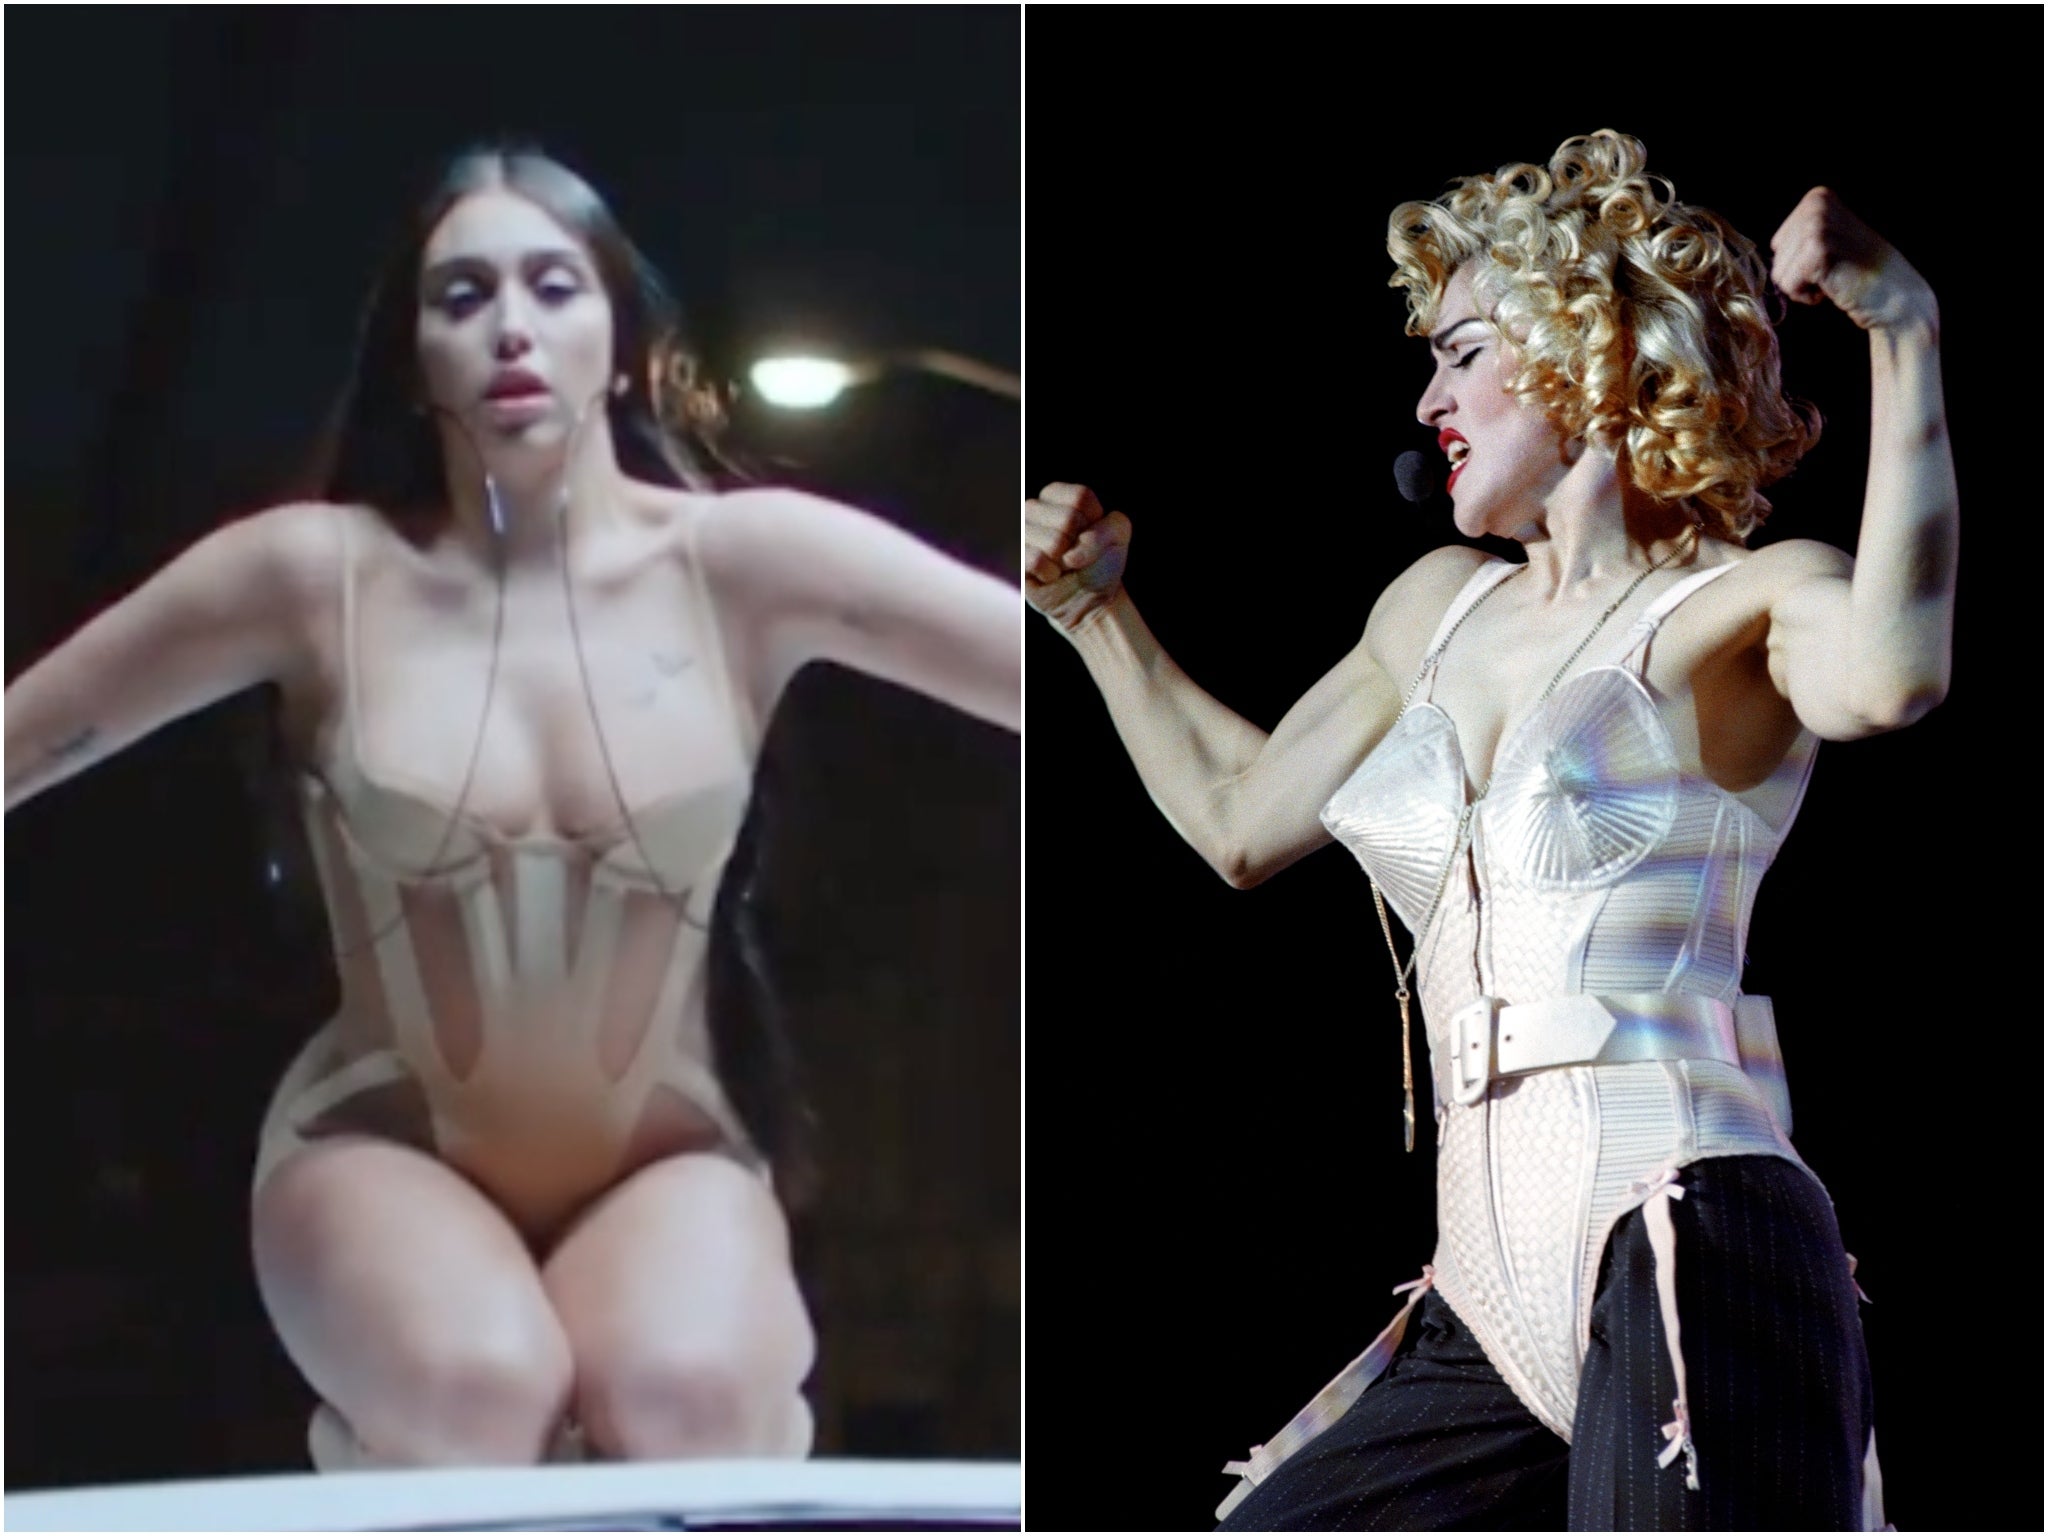 Lourdes Leon (L) in the new Mugler campaign and Madonna (R) in 1990